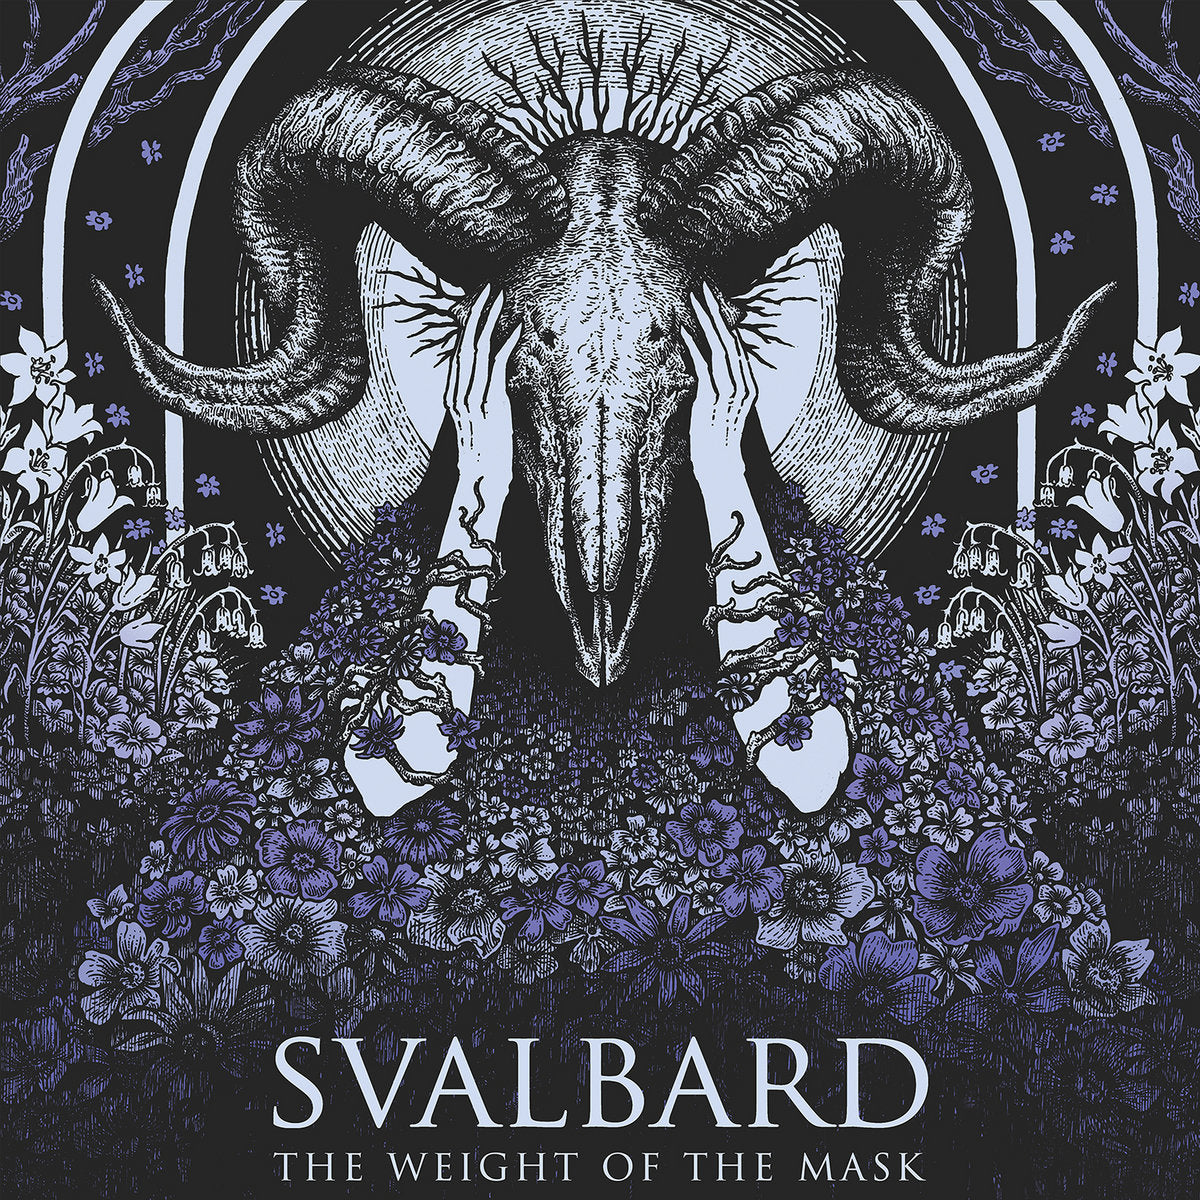 SVALBARD "The Weight Of The Mask" CD